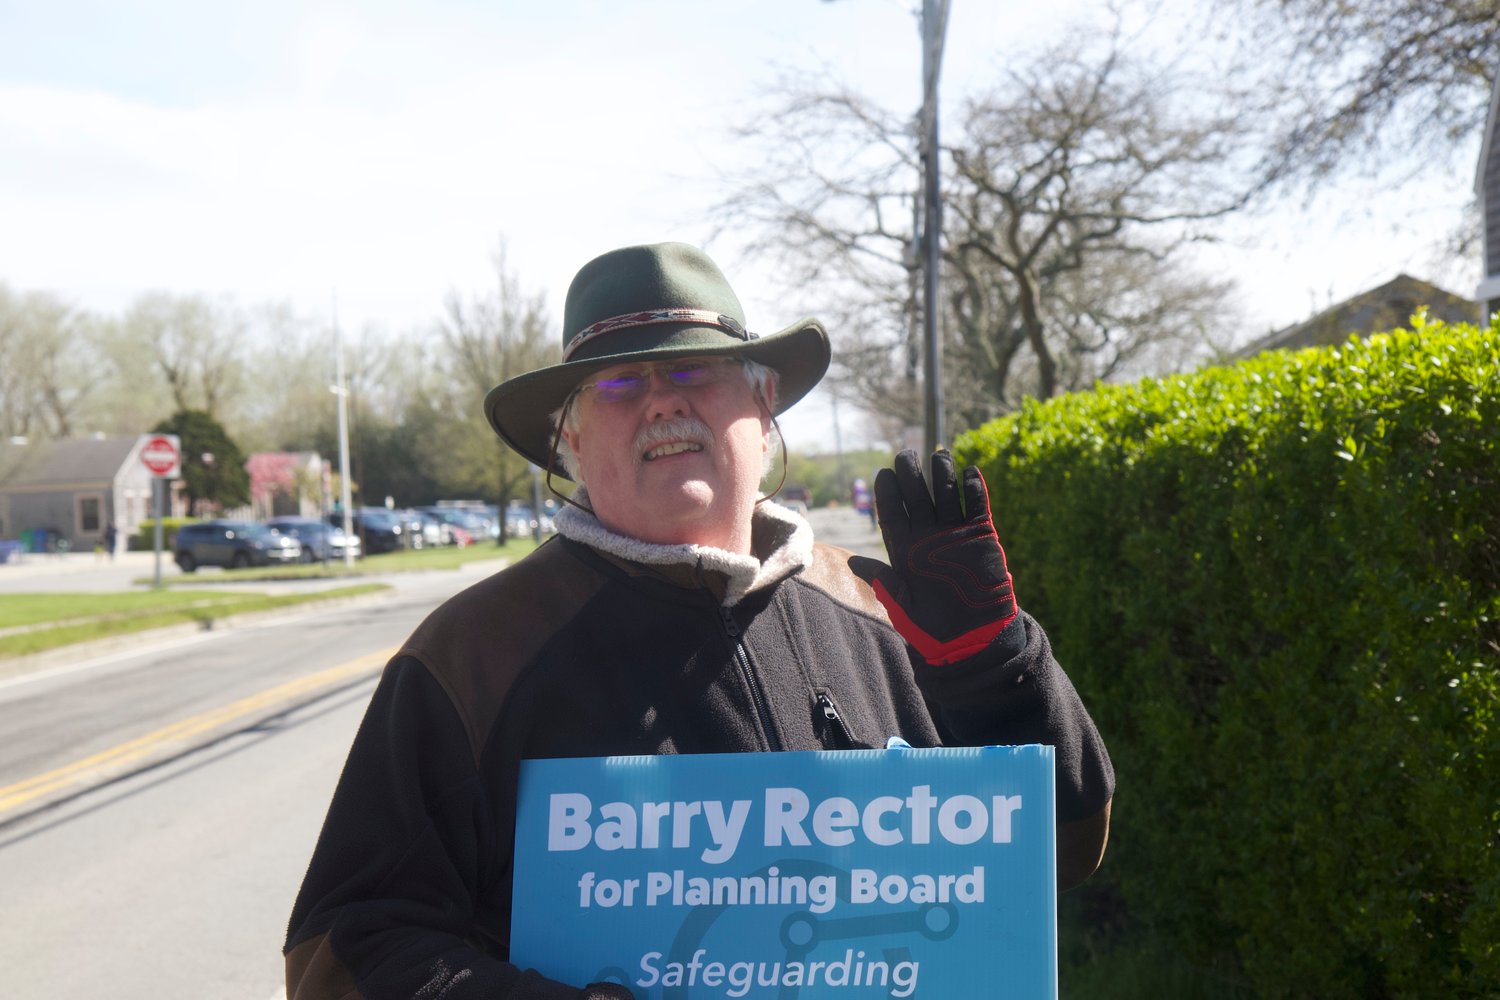 Barry Rector won a three-year seat on the Planning Board over write-in candidate Emmy Kilvert